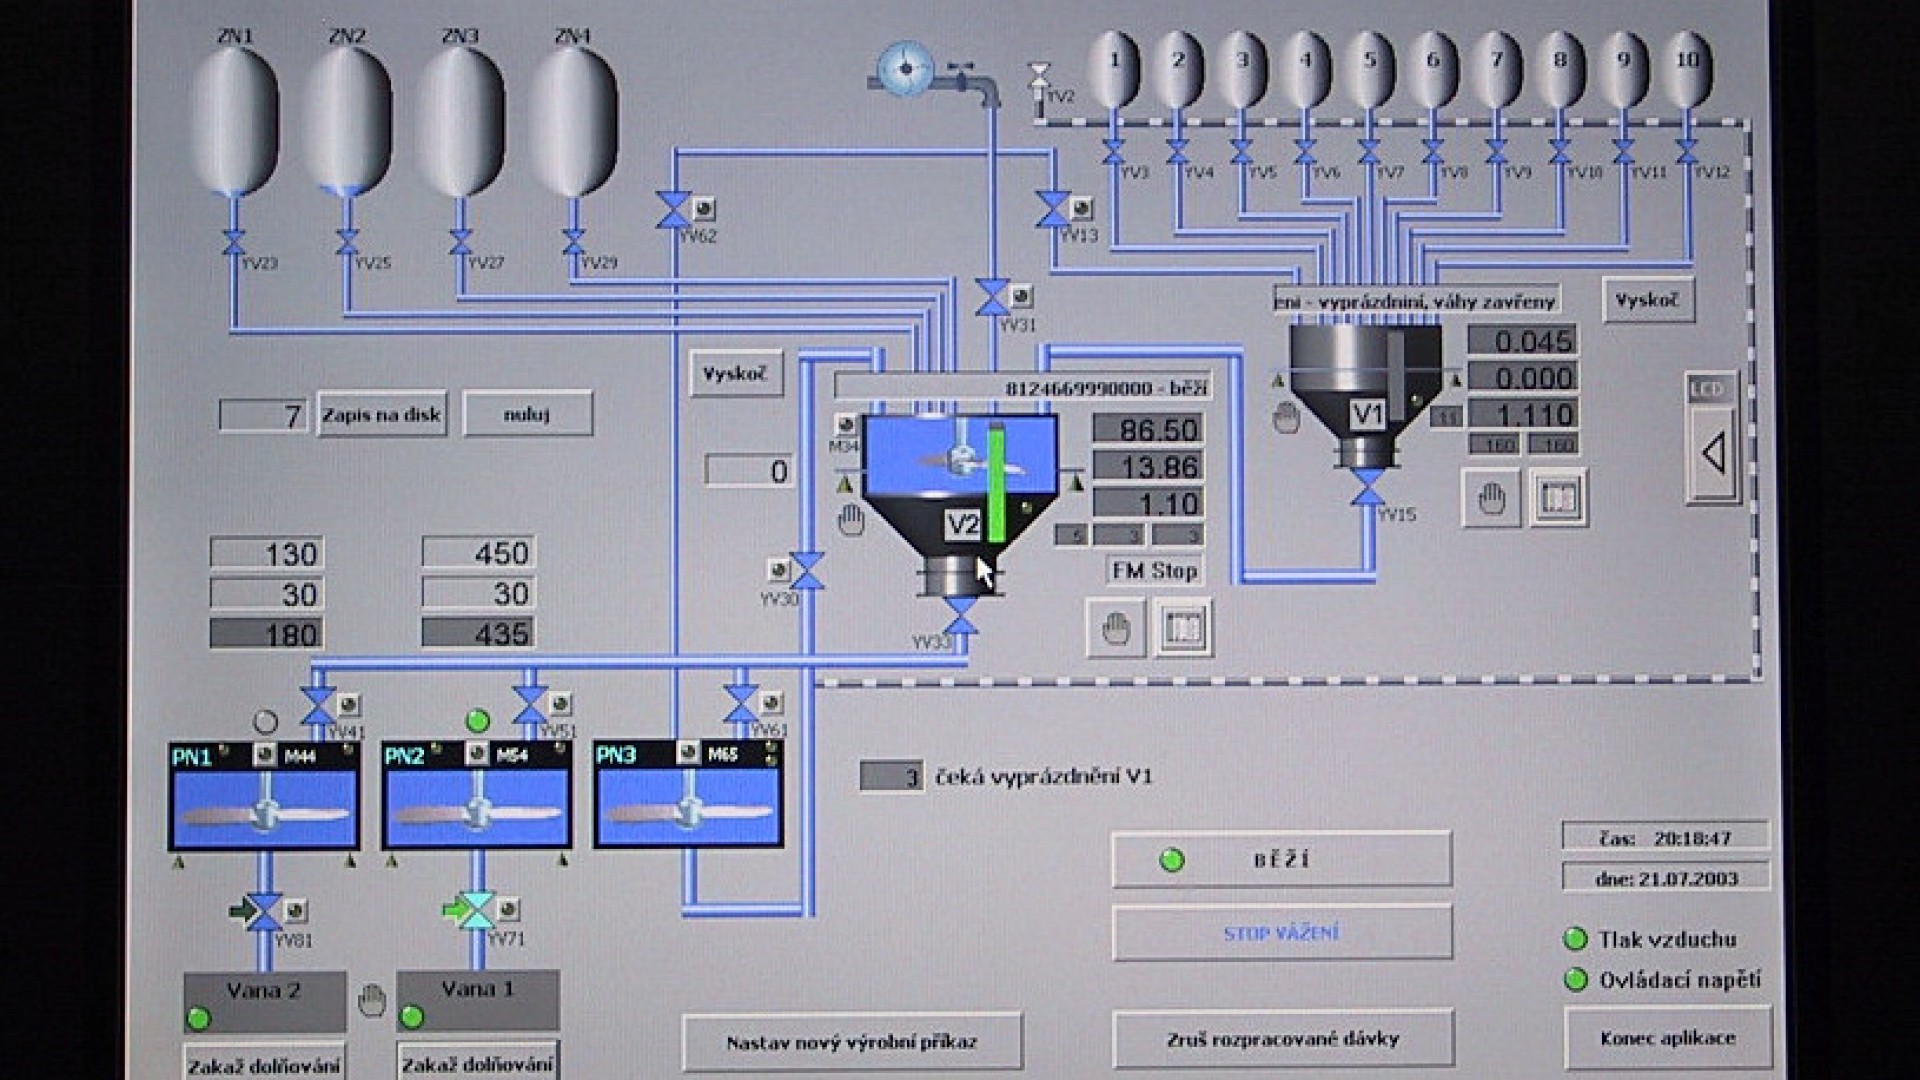 Control system - control cabinets